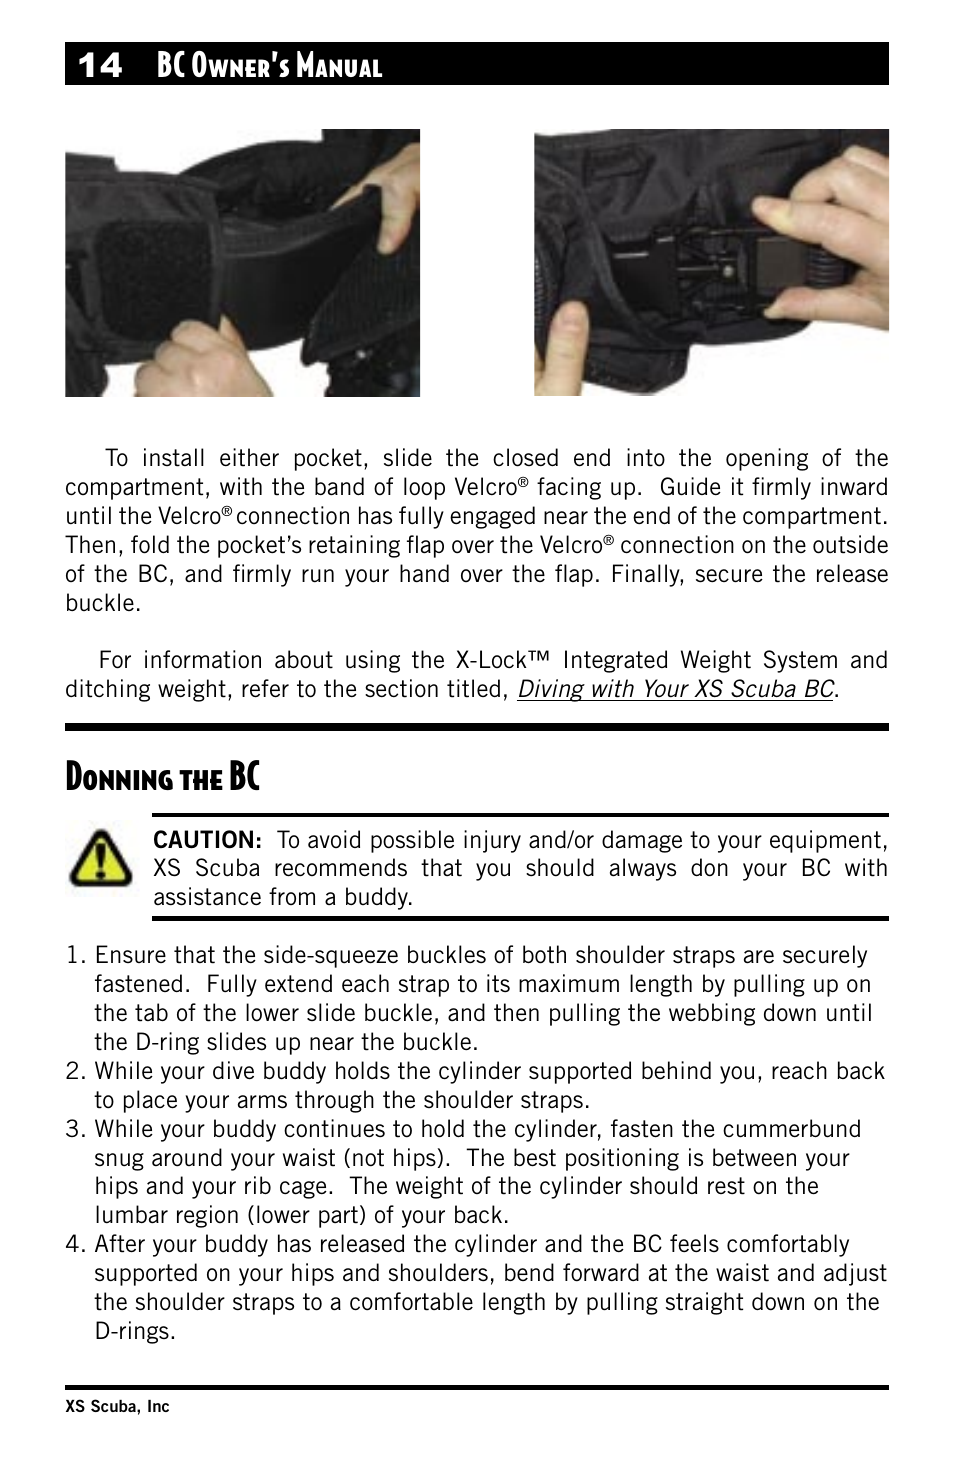 Donning the bc, 14 bc owner’s manual | XS Scuba Buoyancy Compensator User Manual | Page 14 / 24